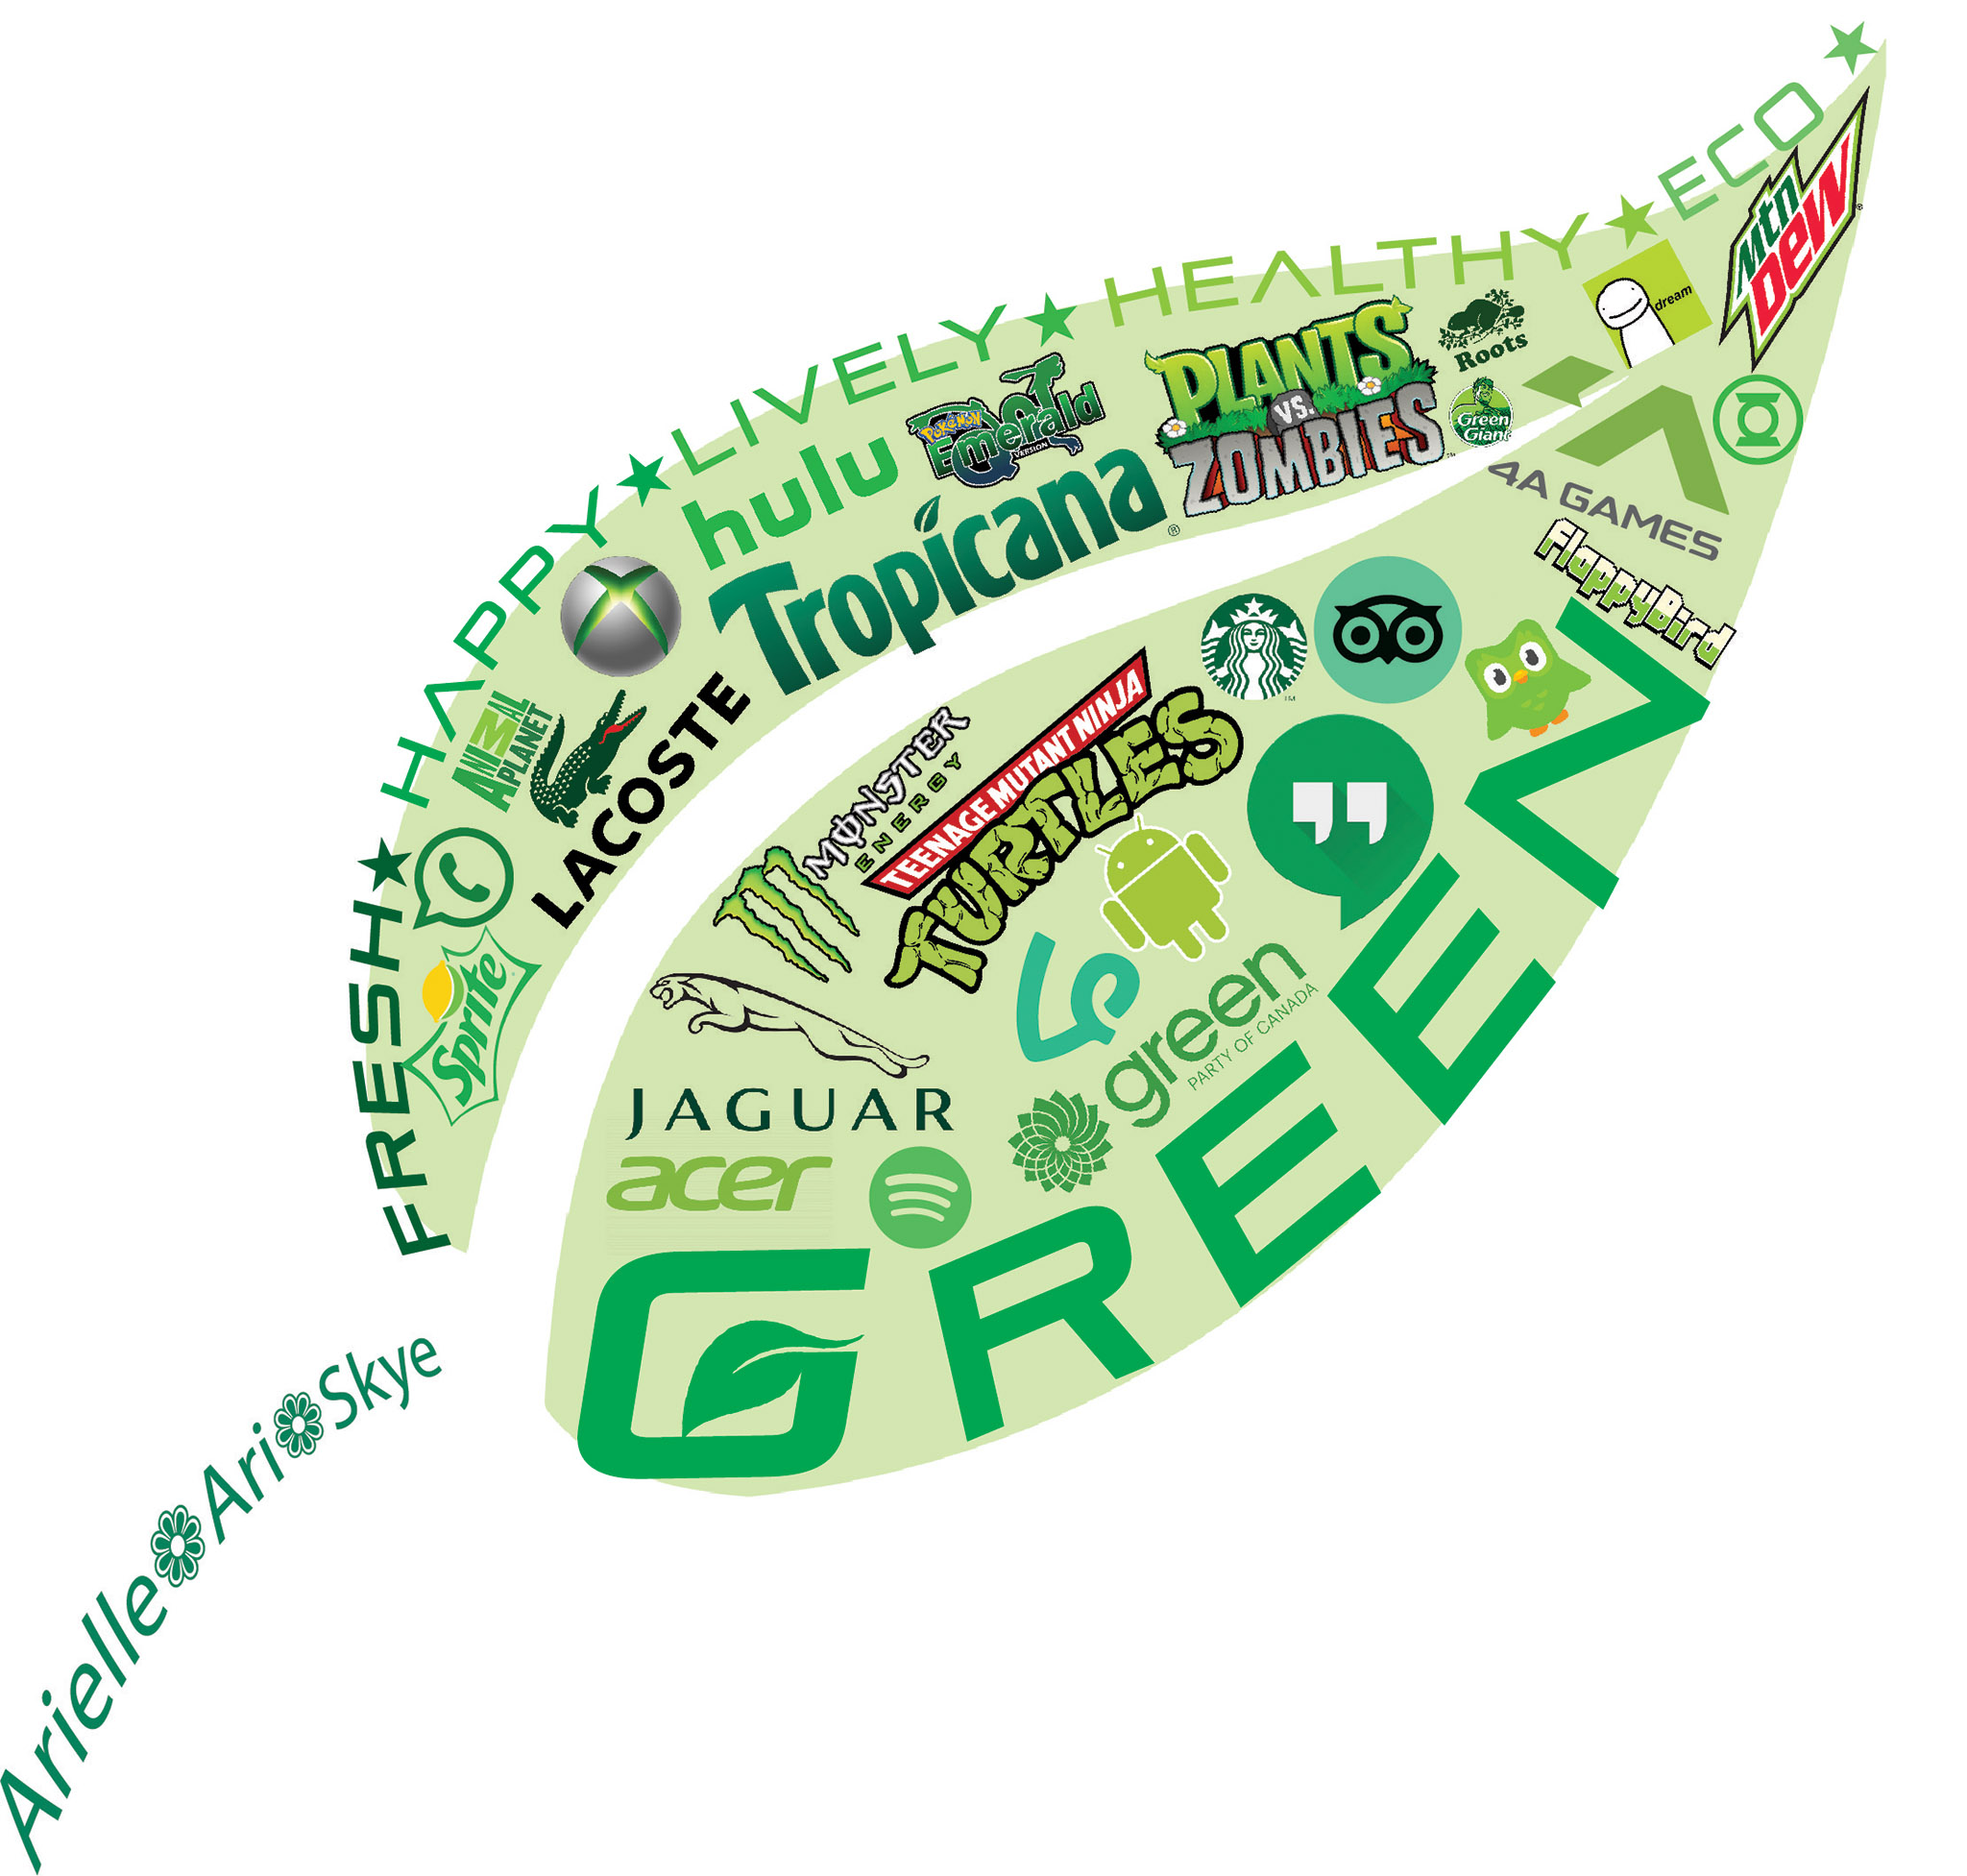 This project consists of a variety of green logos put on a green background shaped like a leaf.